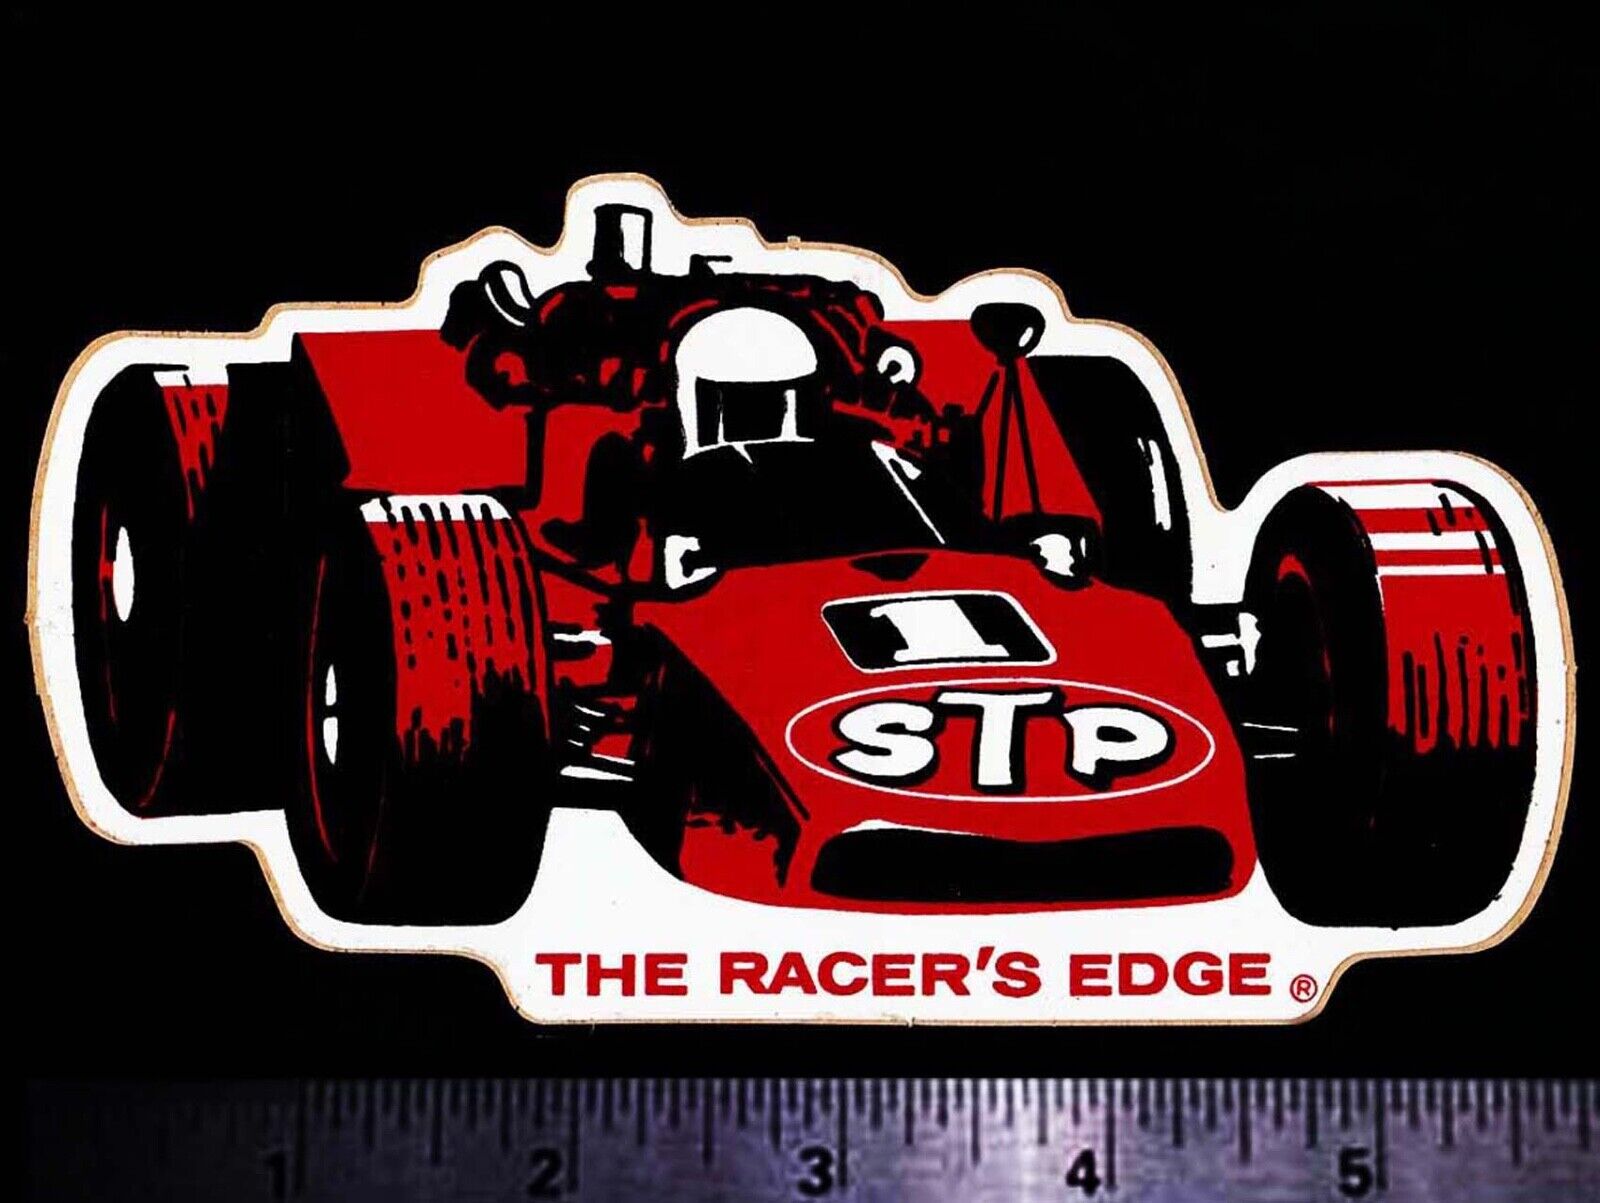 STP Mario Andretti INDY 500 - Original Vintage 1960’s 70’s Racing Decal/Sticker